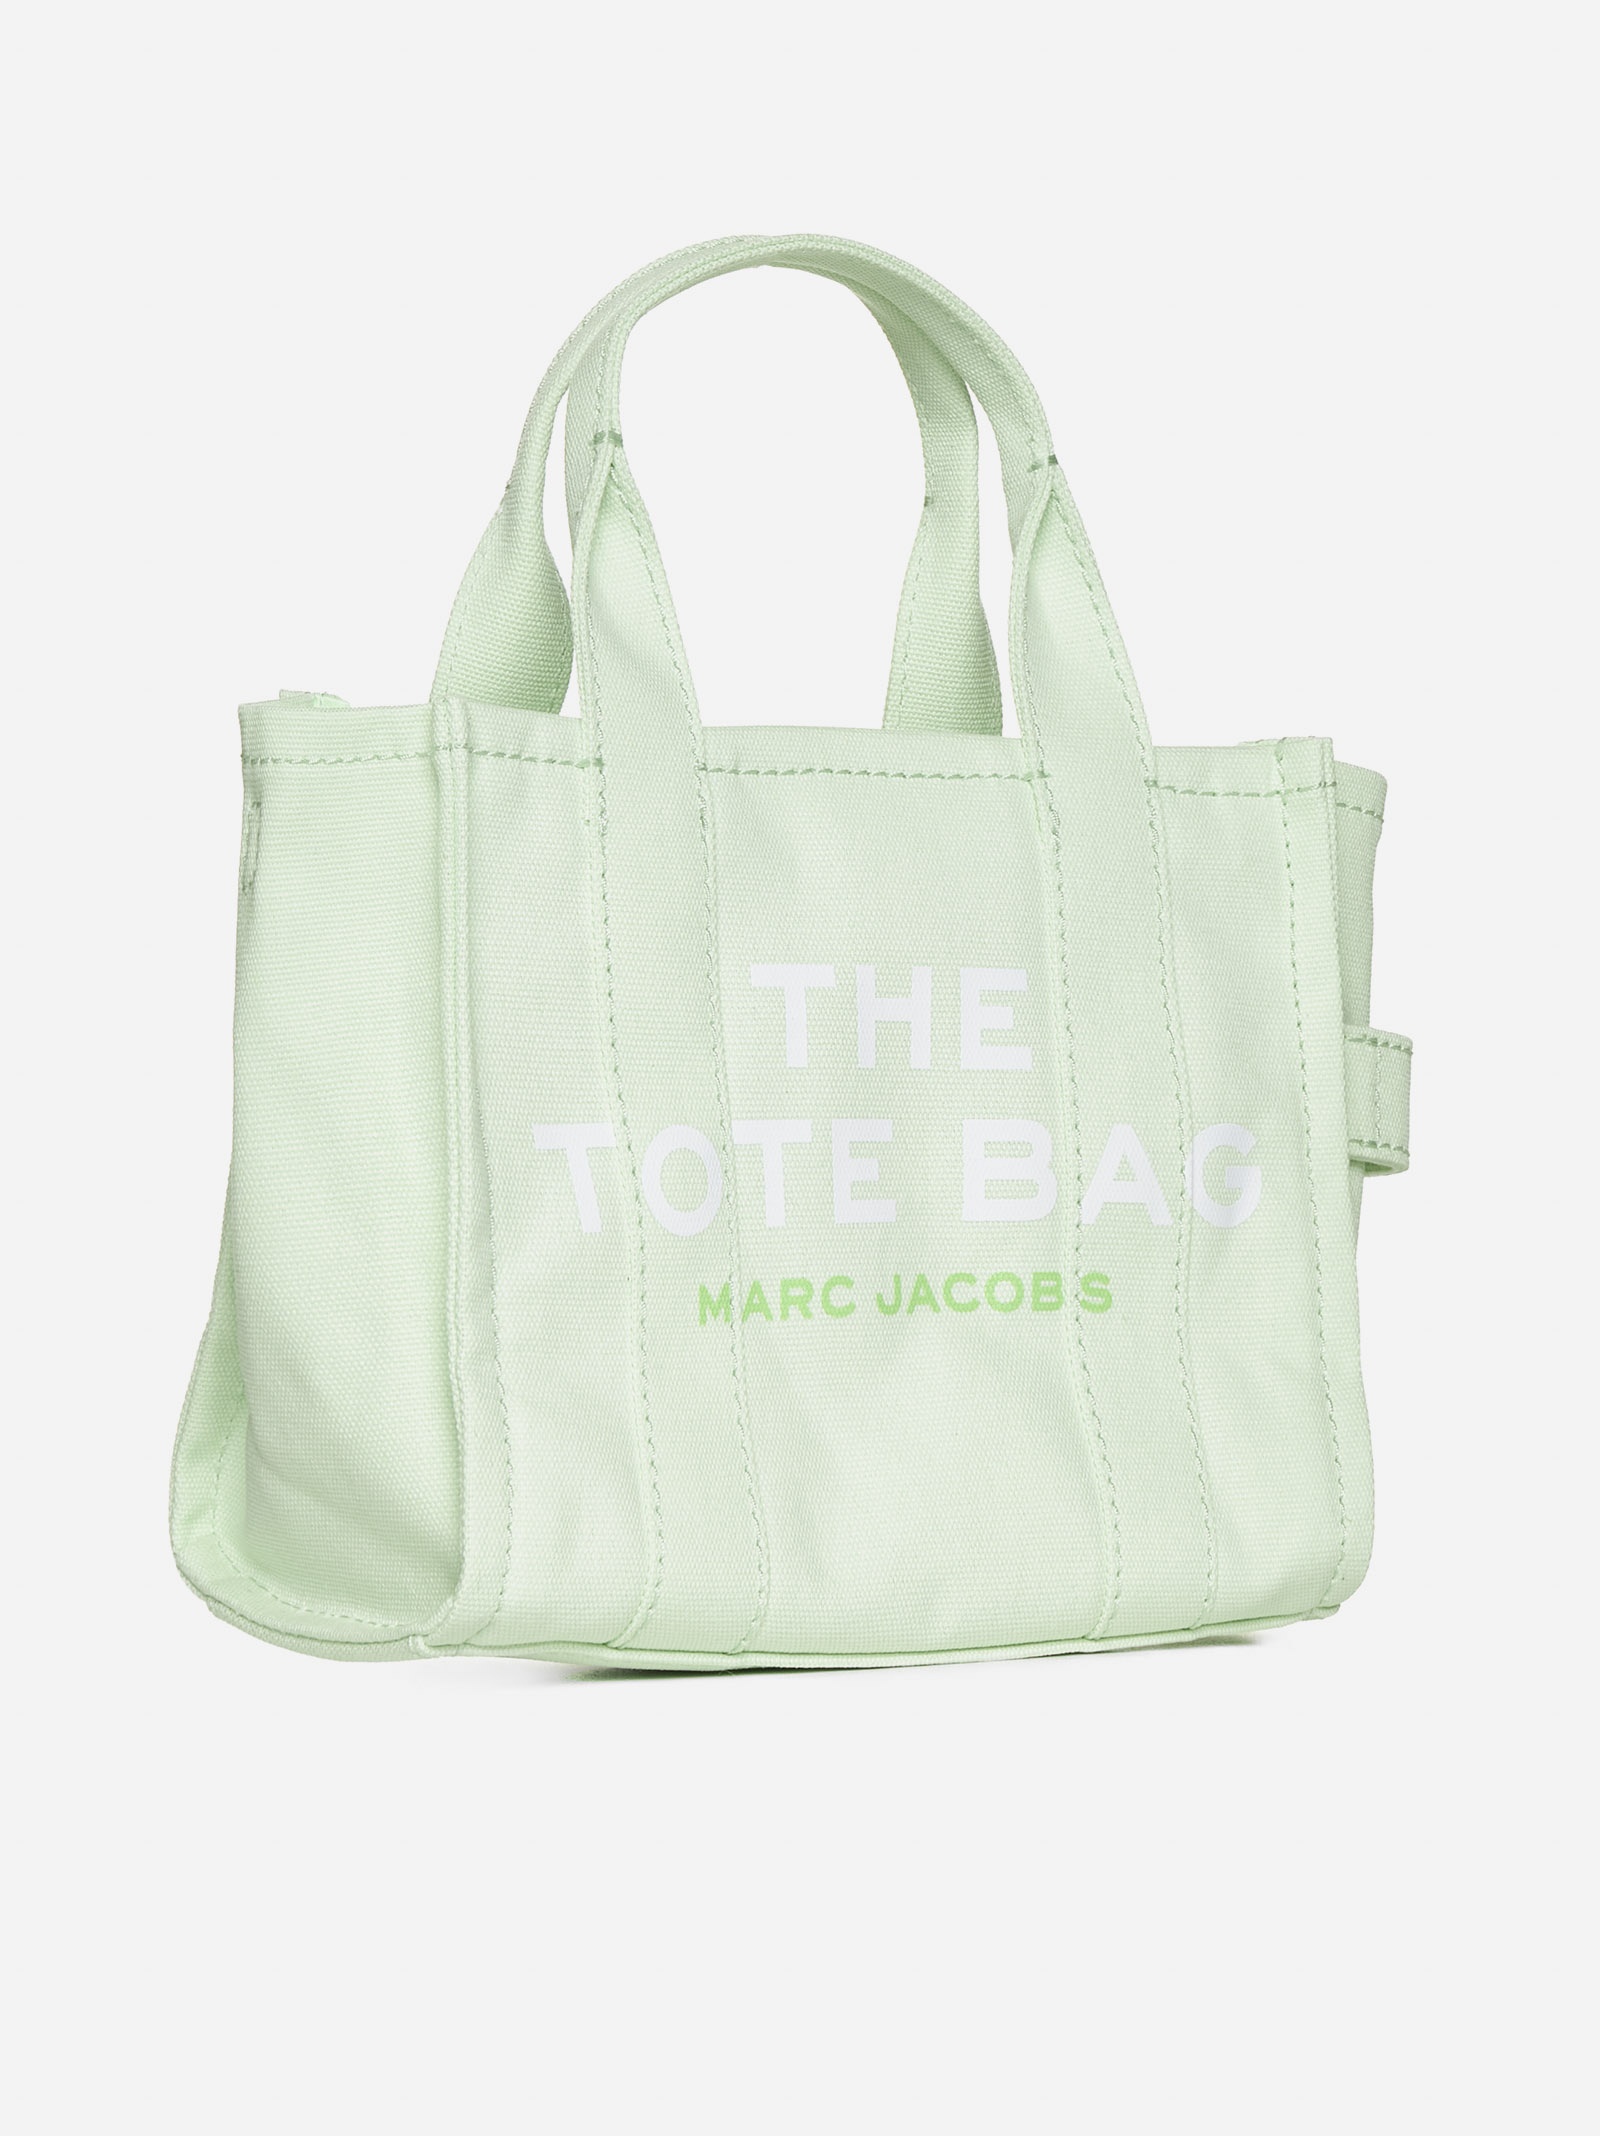 The small tote canvas bag - Marc Jacobs - Women